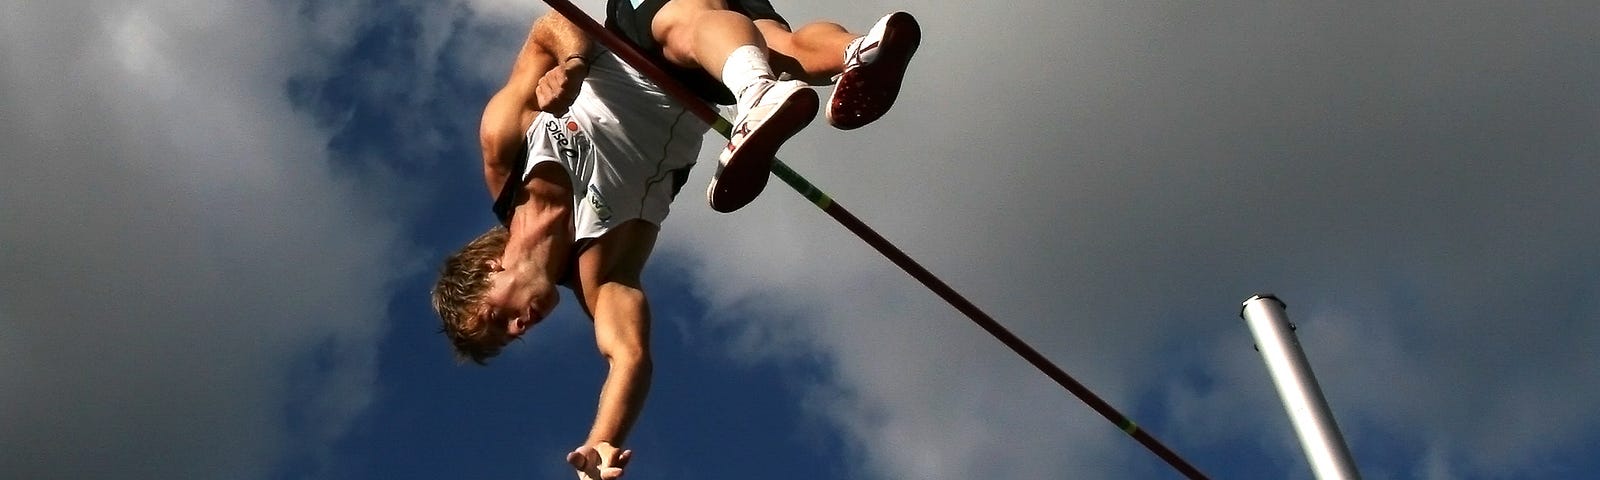 Male pole-vaulter clearing the bar